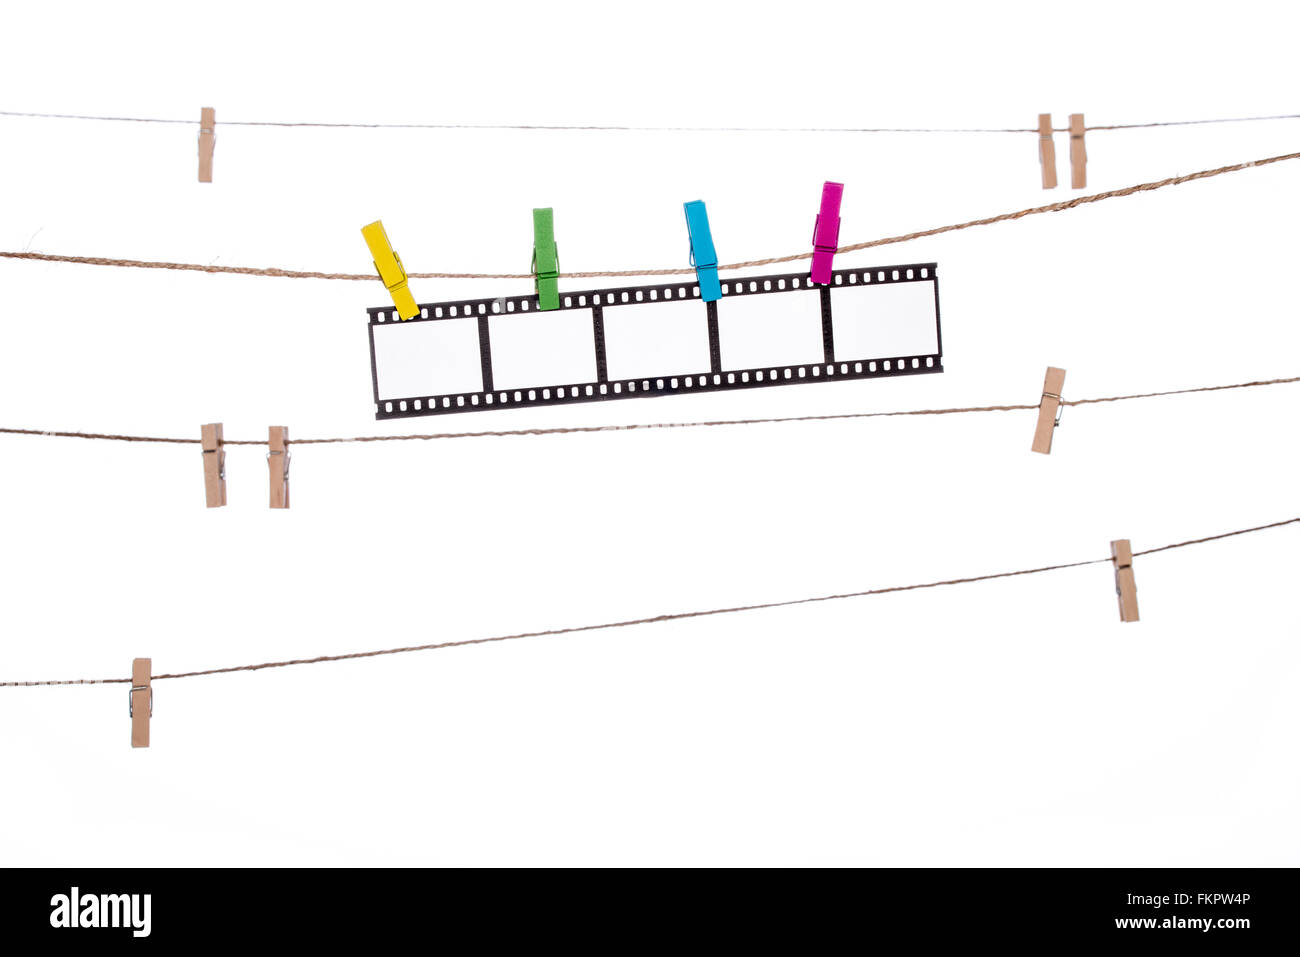 Colorful Clothespins On A Clothesline Hanging Photographic Negatives